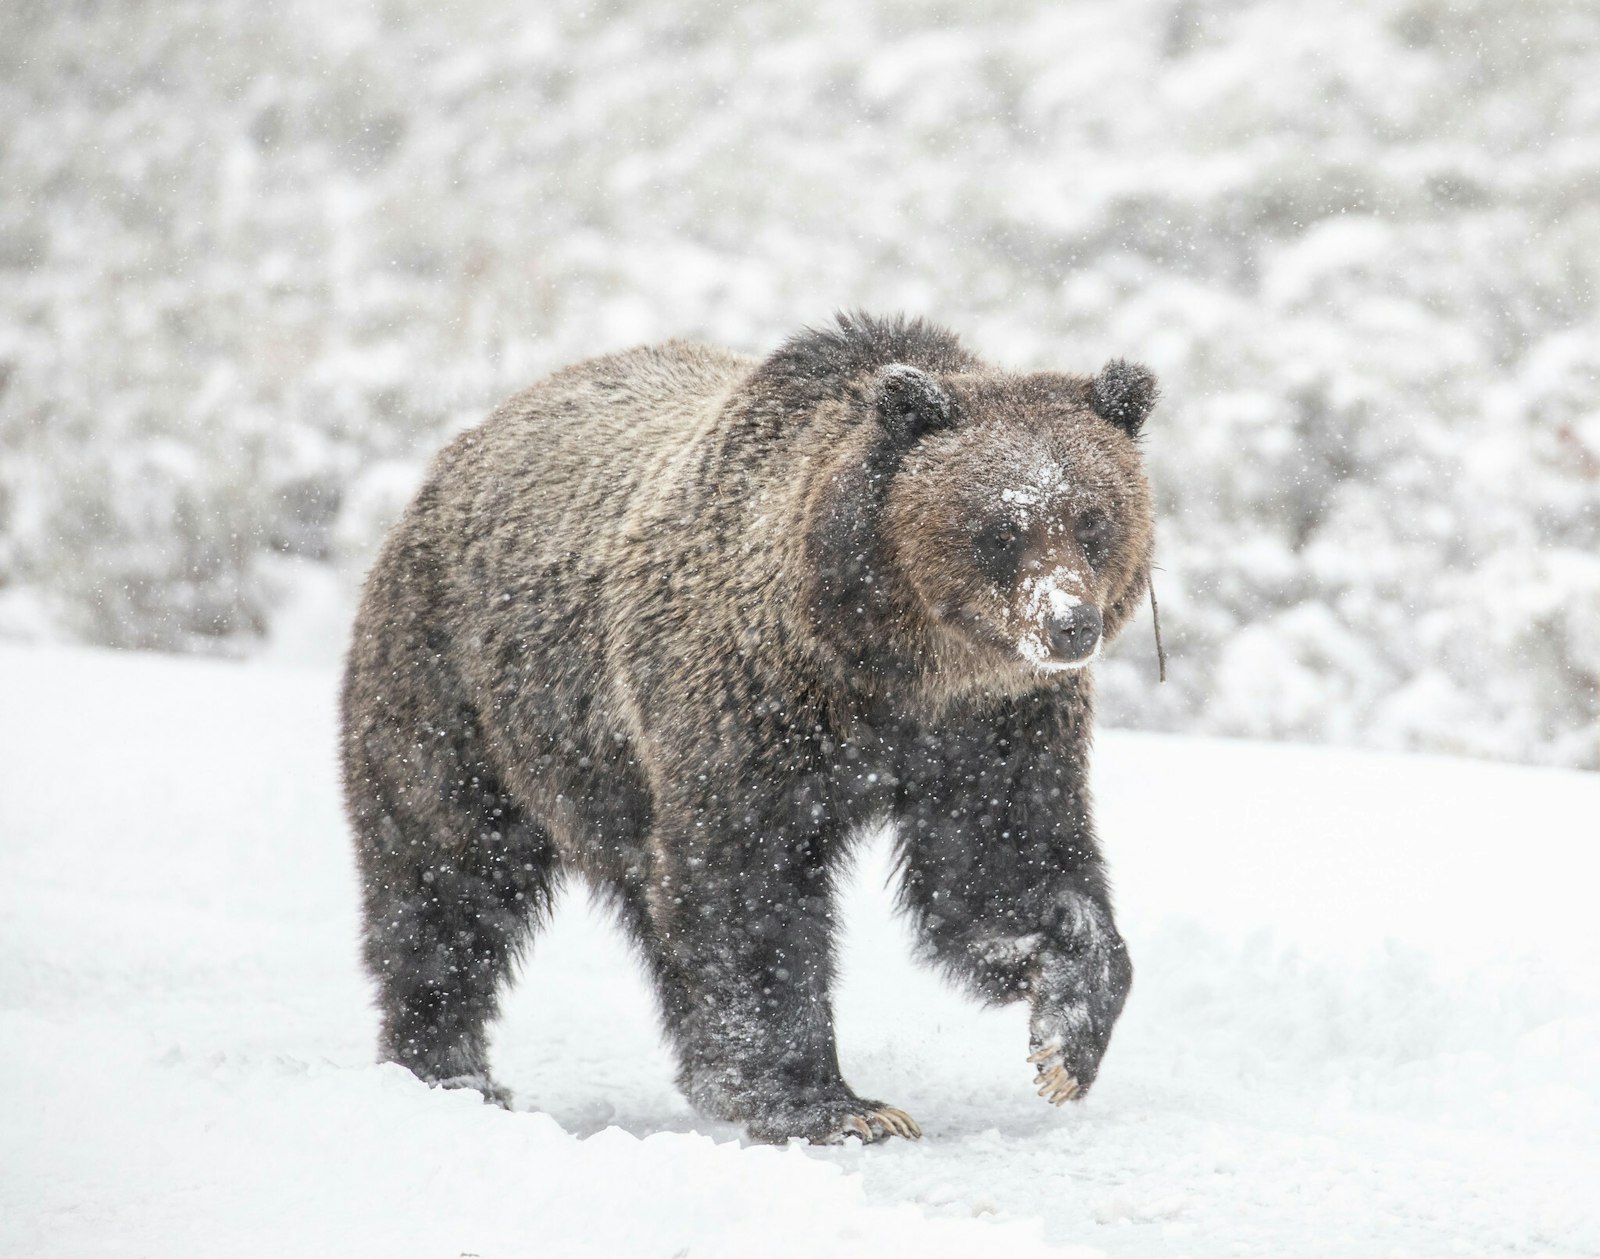 A large brown grizzly bear walks through a snow-draped landscape